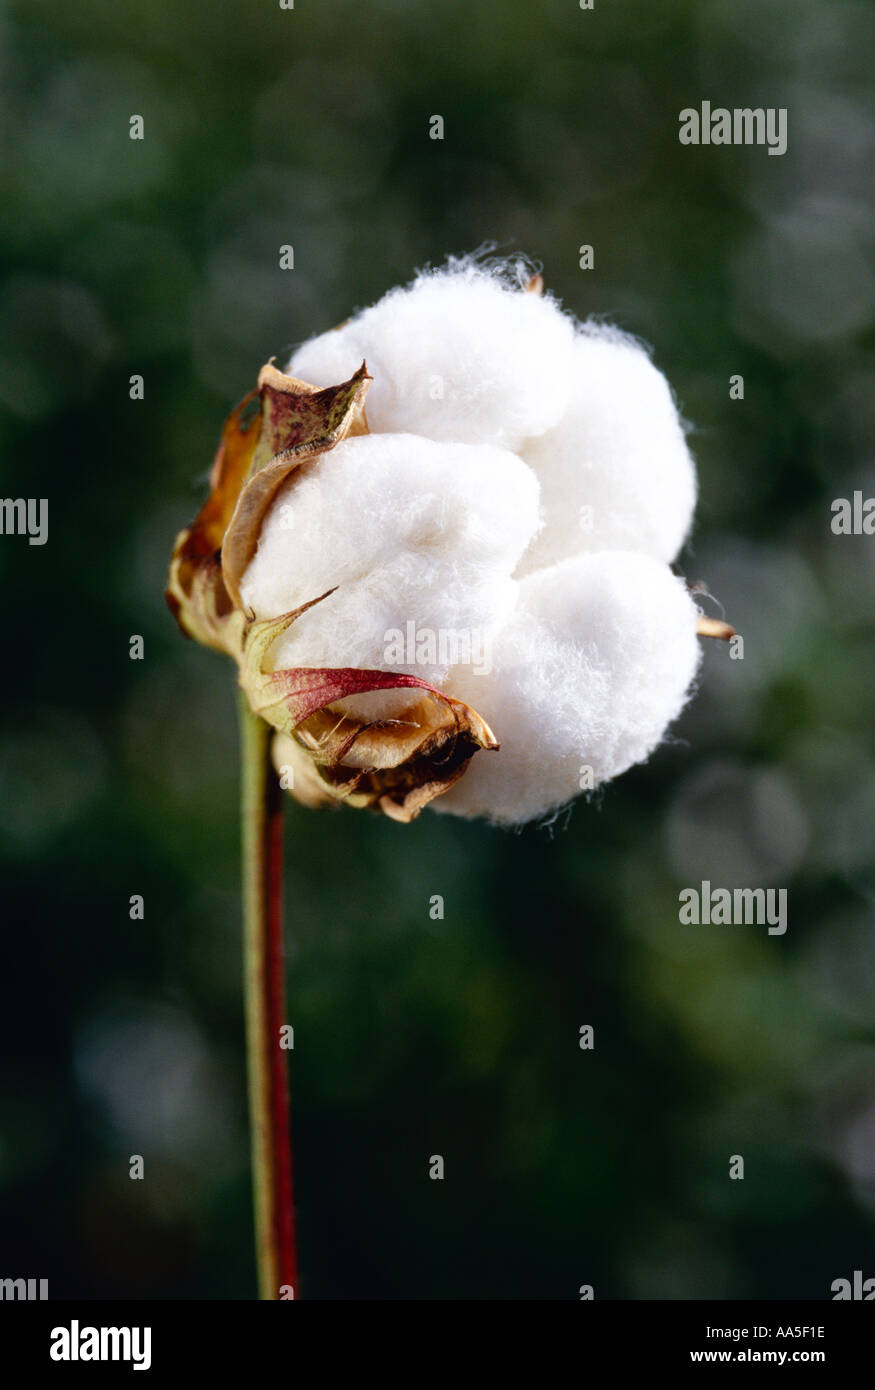 Agriculture - Mature cotton boll in the process of opening / Texas, USA. Stock Photo